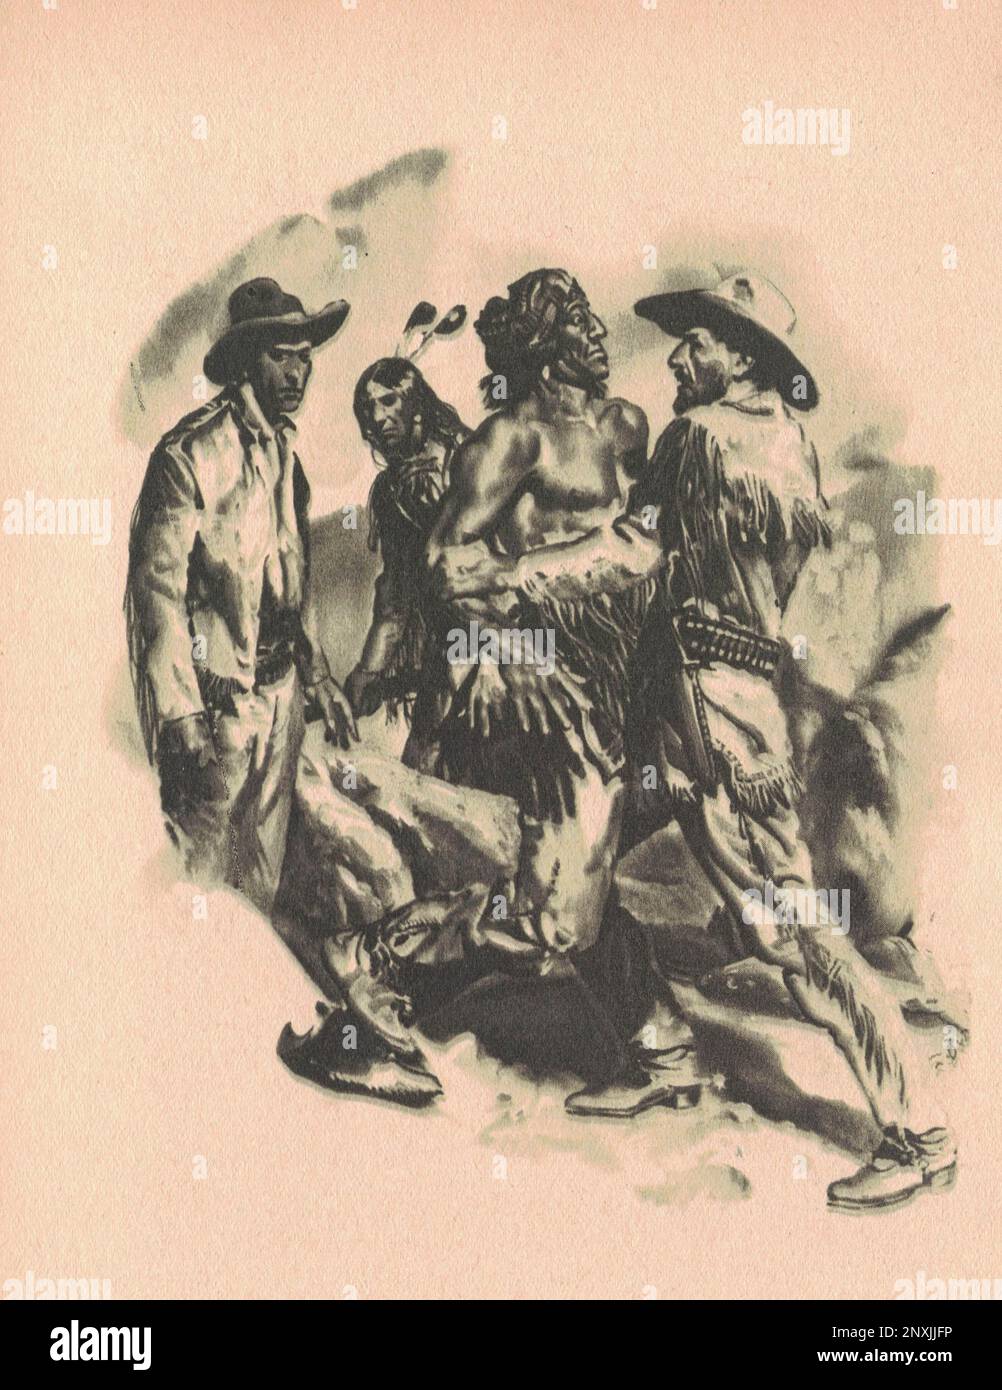 Black and white illustration shows a fight between men. Drawing shows life in the Old West. Vintage black and white picture shows adventure life in the previous century. Stock Photo